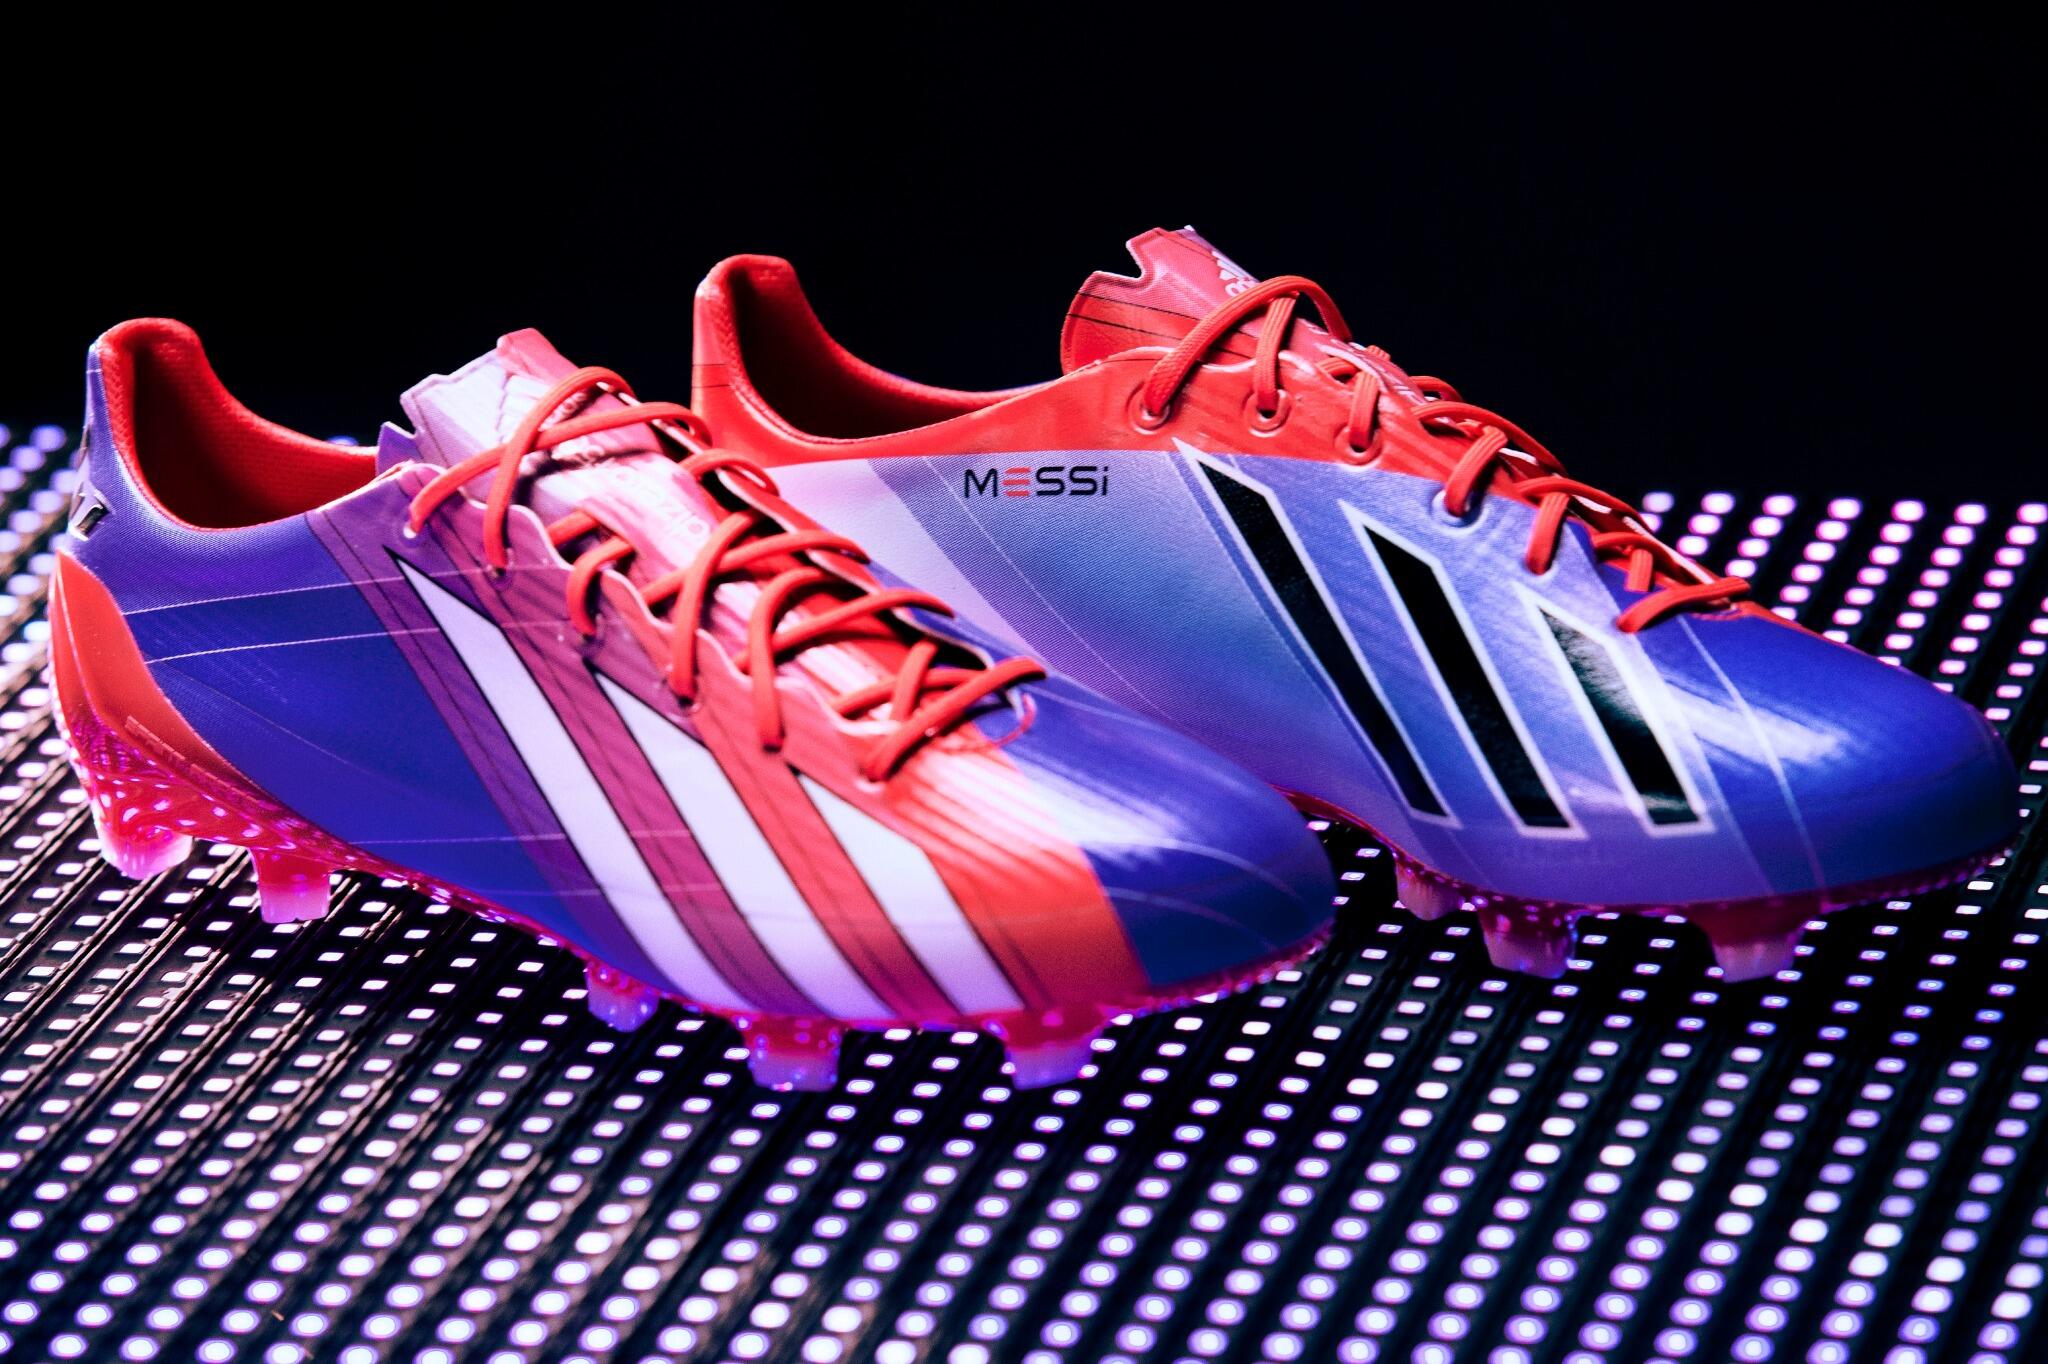 Involucrado Espejismo entrenador adidas Football on Twitter: "Play the Messi Way at the speed of light. This  is the new adizero f50 Messi http://t.co/I8rP01X9nV" / Twitter